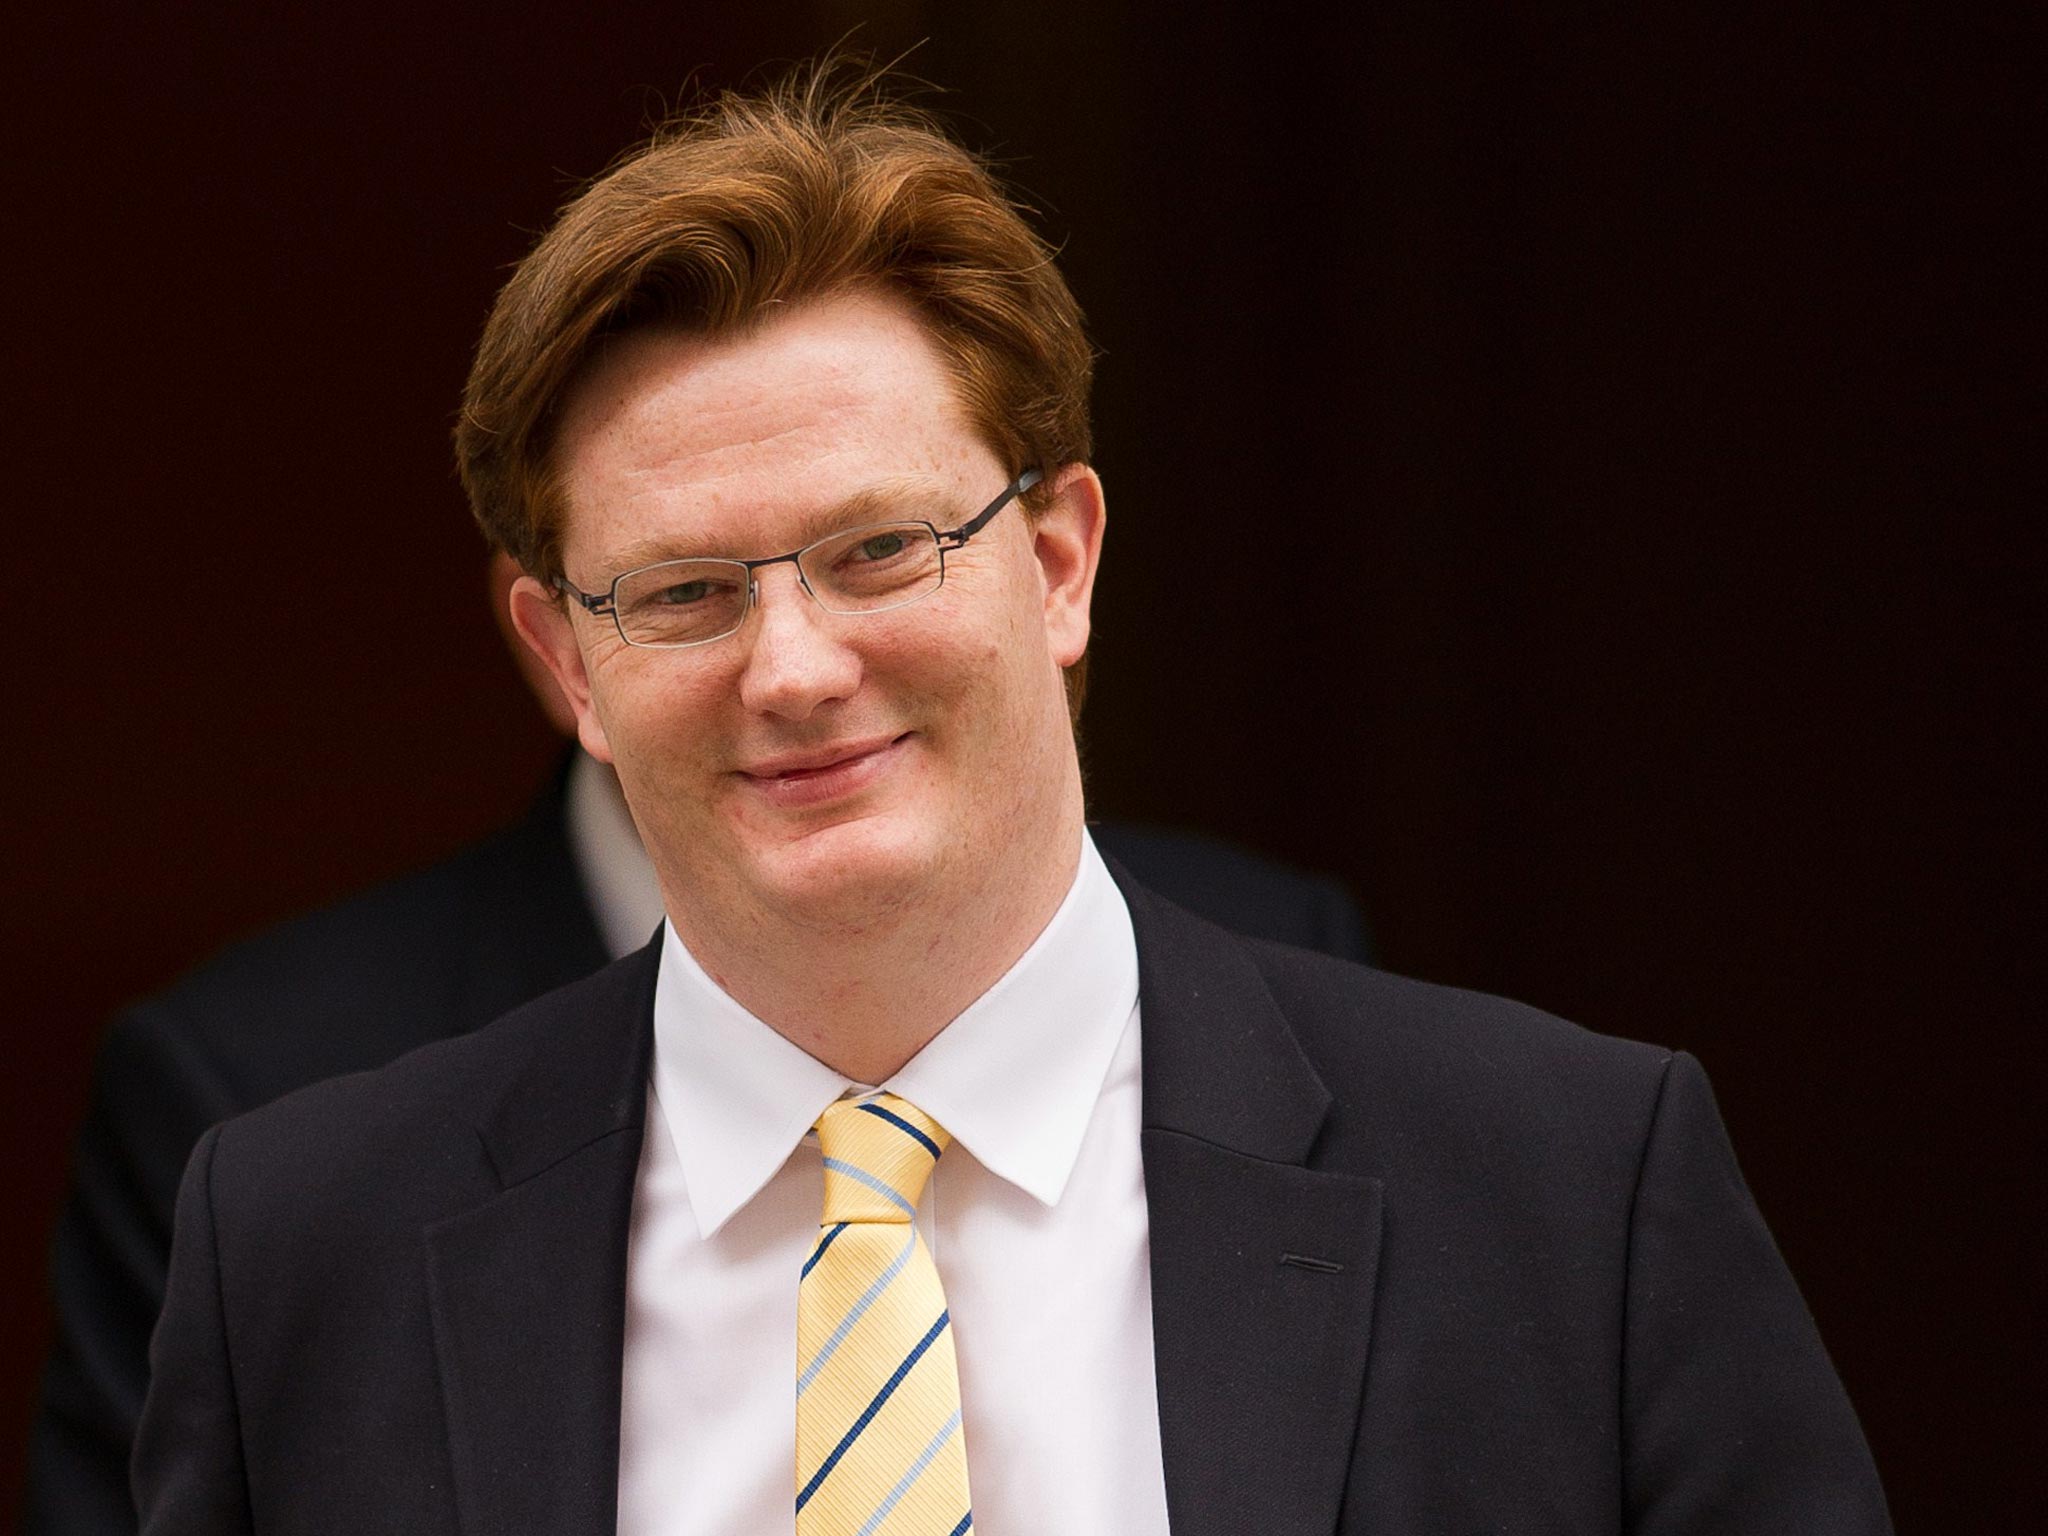 Liberal Democrat Chief Secretary to the Treasury, Danny Alexander, to claim 3.3 million British jobs are connected to a place in Europe